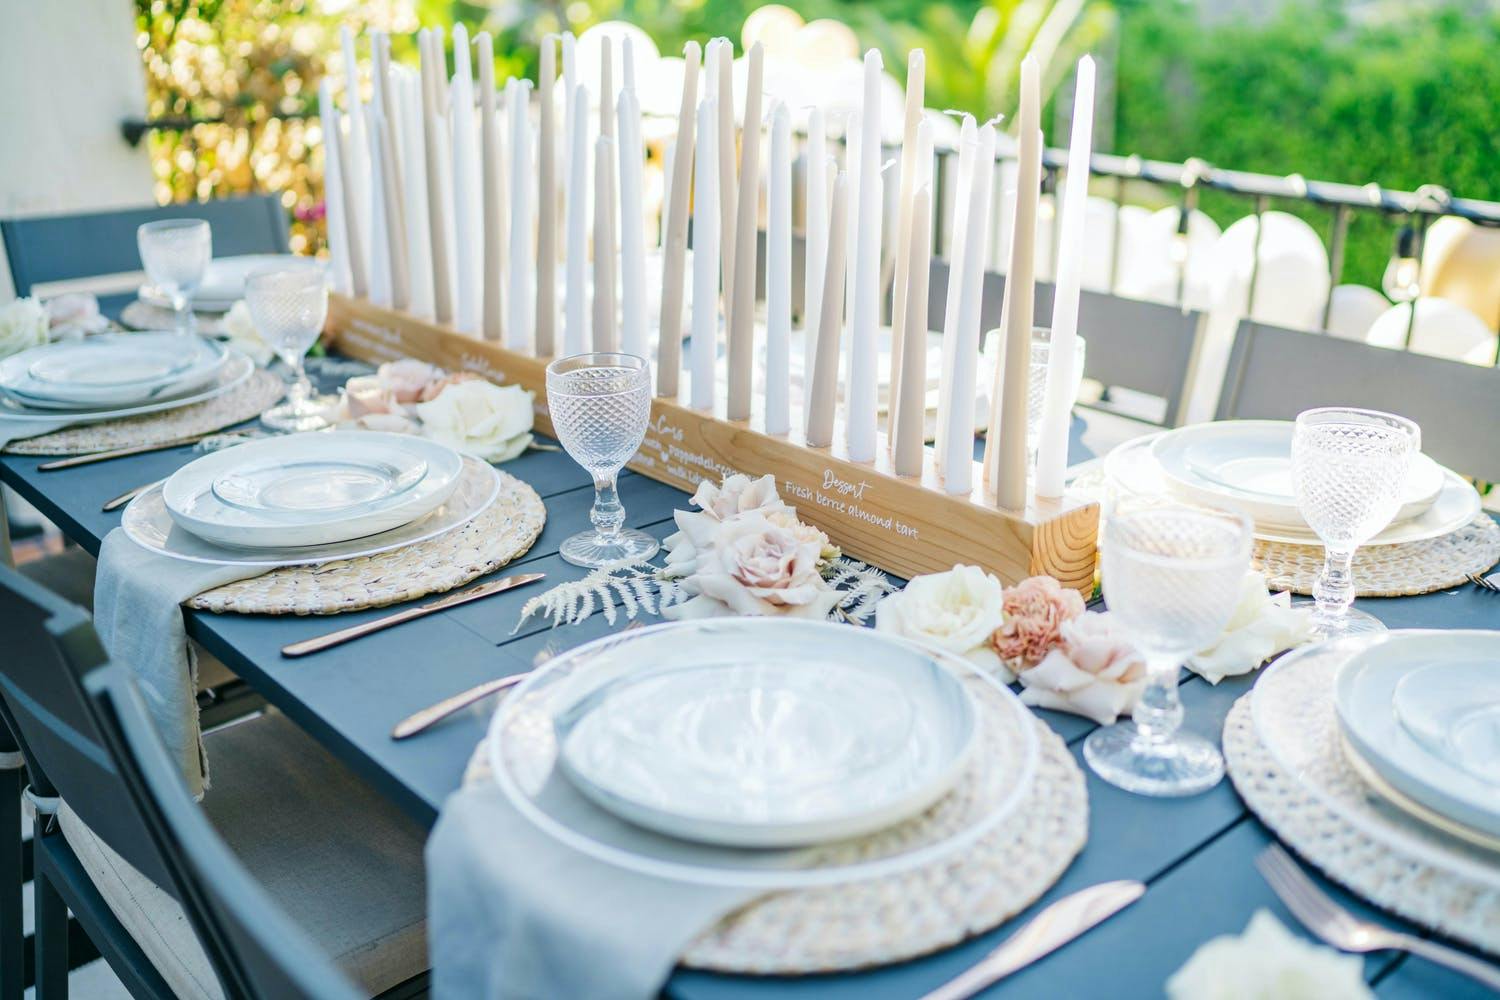 Tablescape with Custom Menu and Seating Chart Printed on Wooden Candle Holder with Pastel Candles for Birthday Party | PartySlate